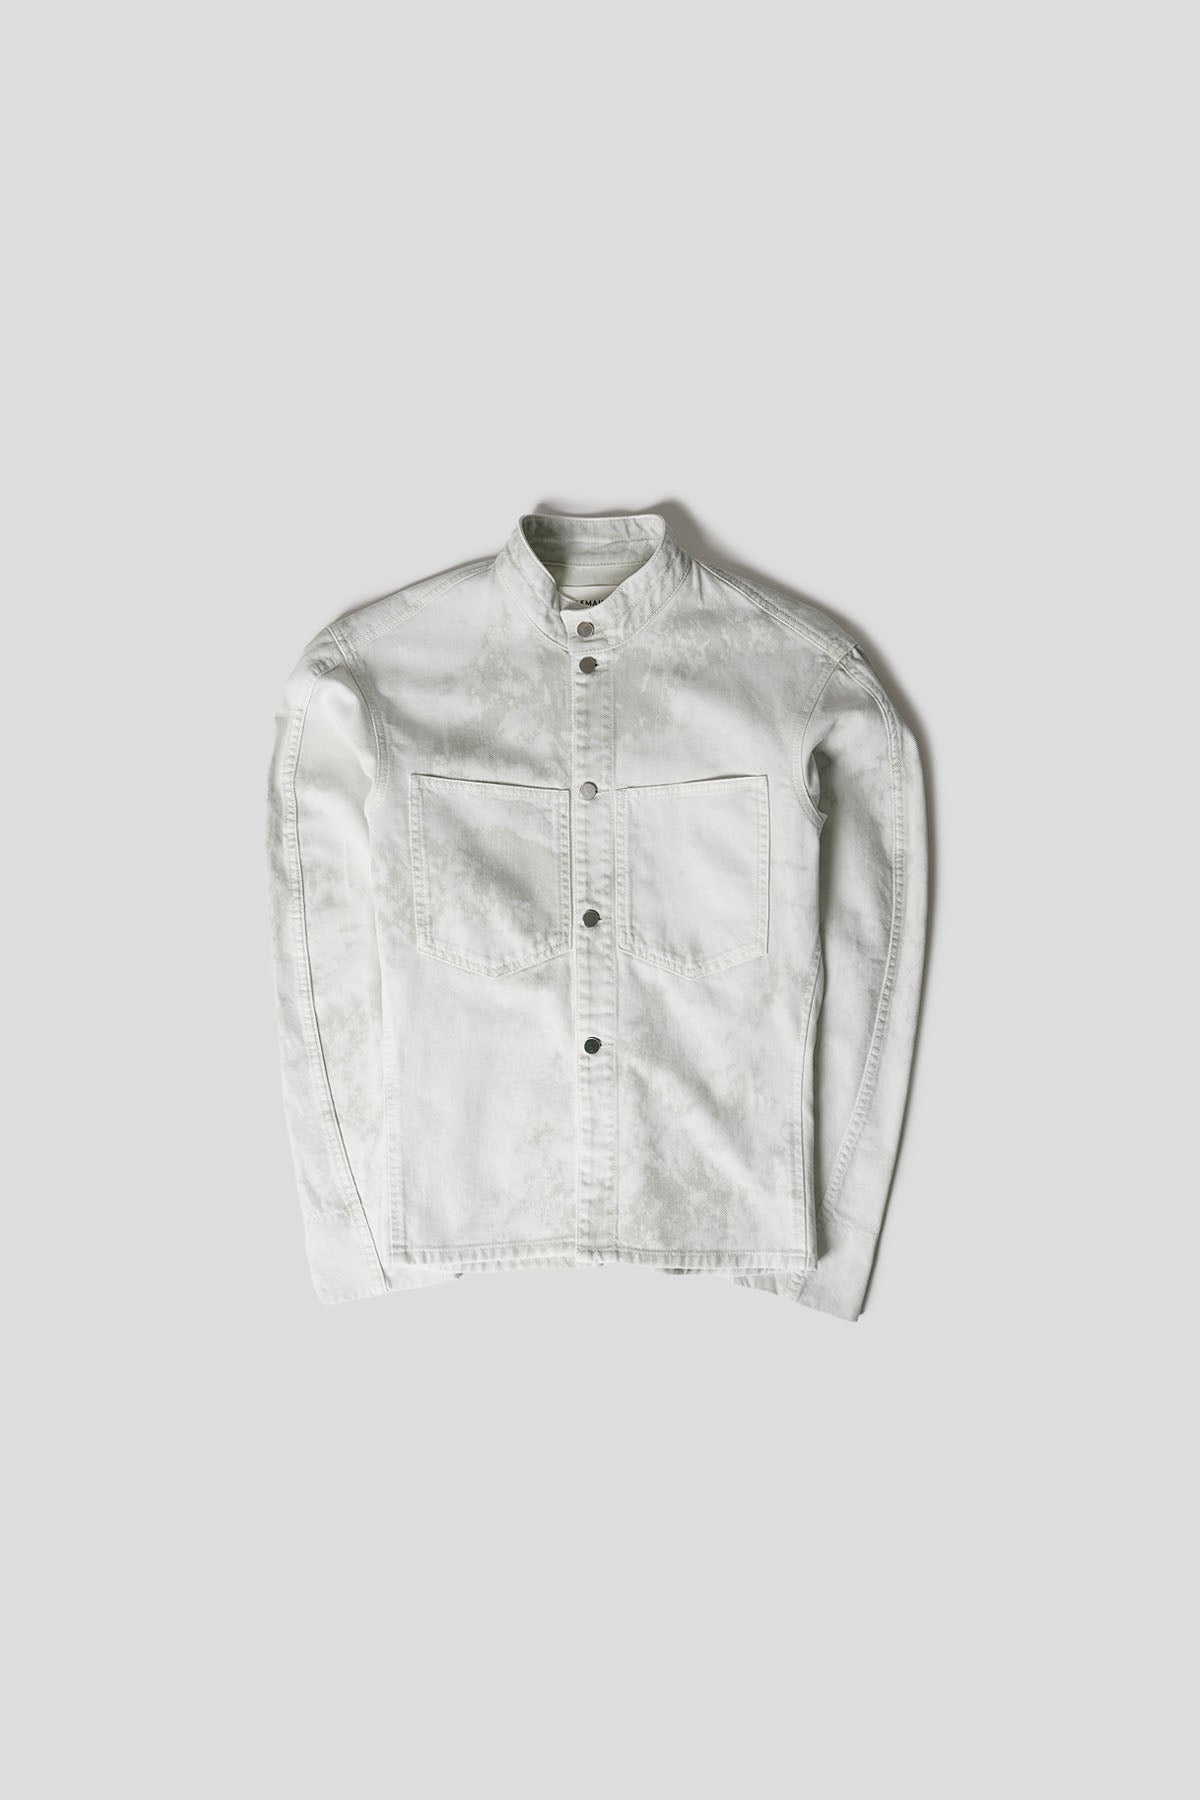 LEMAIRE - LIGHT GREY CURVED JACKETS - LE LABO STORE